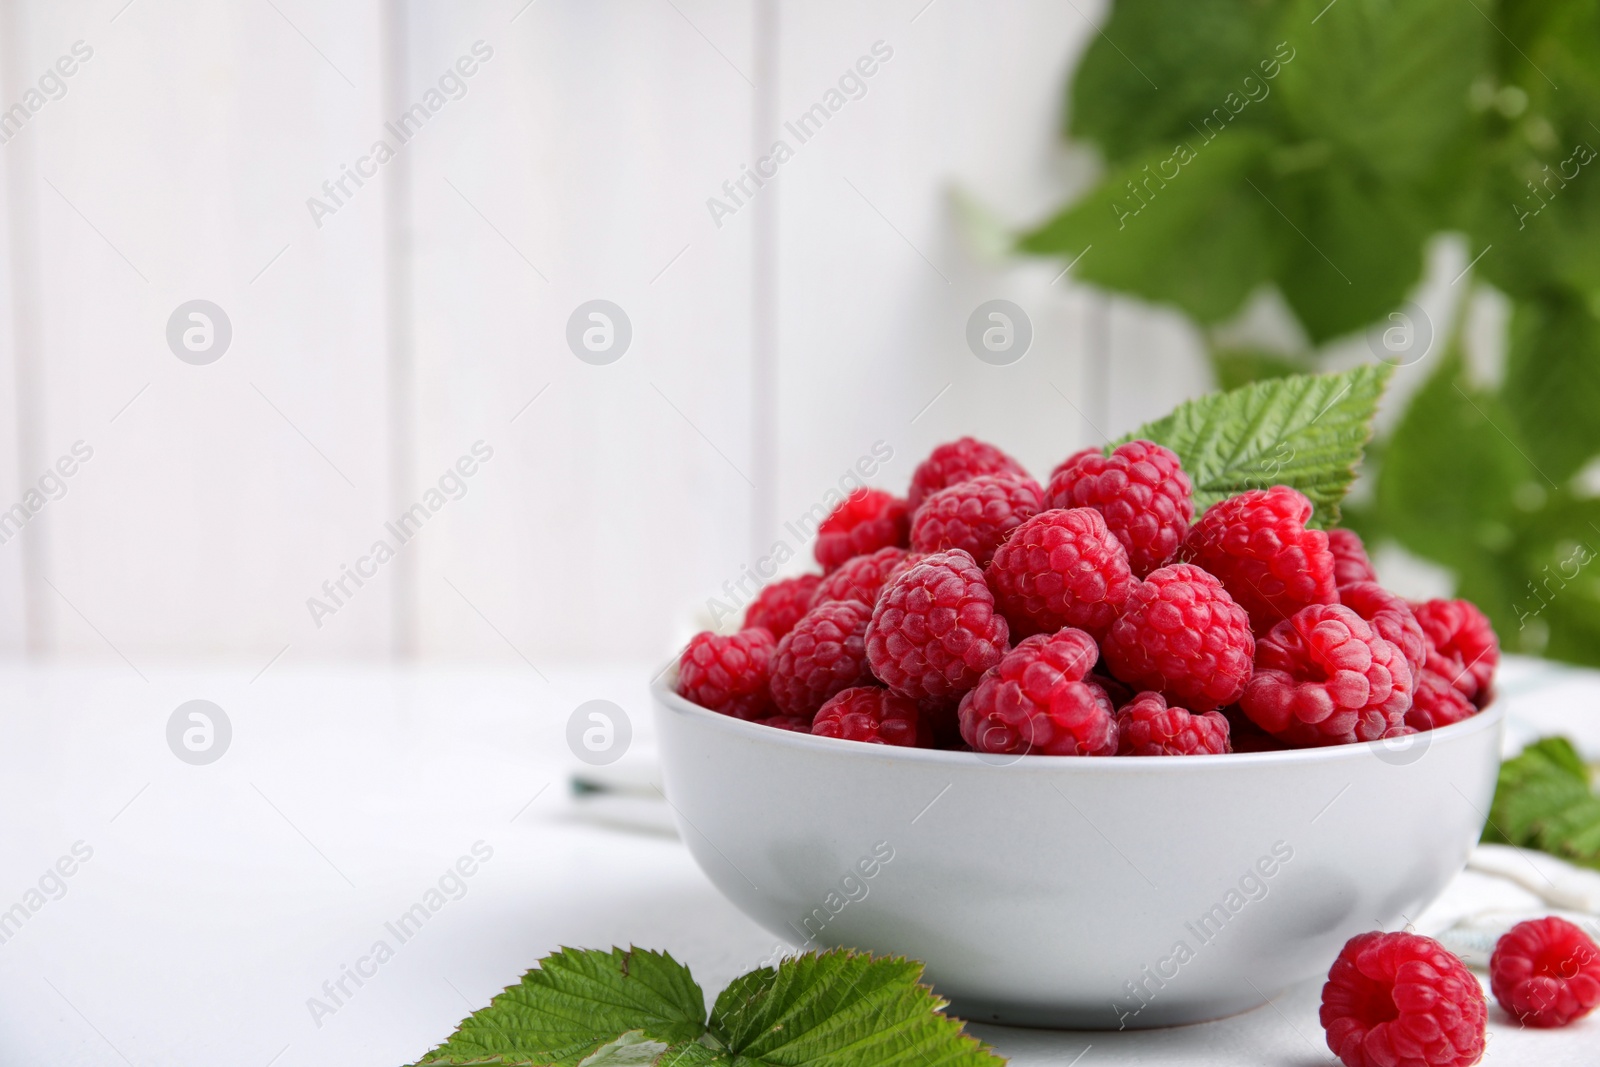 Photo of Bowl of fresh ripe raspberries with green leaves on white table against blurred background. Space for text